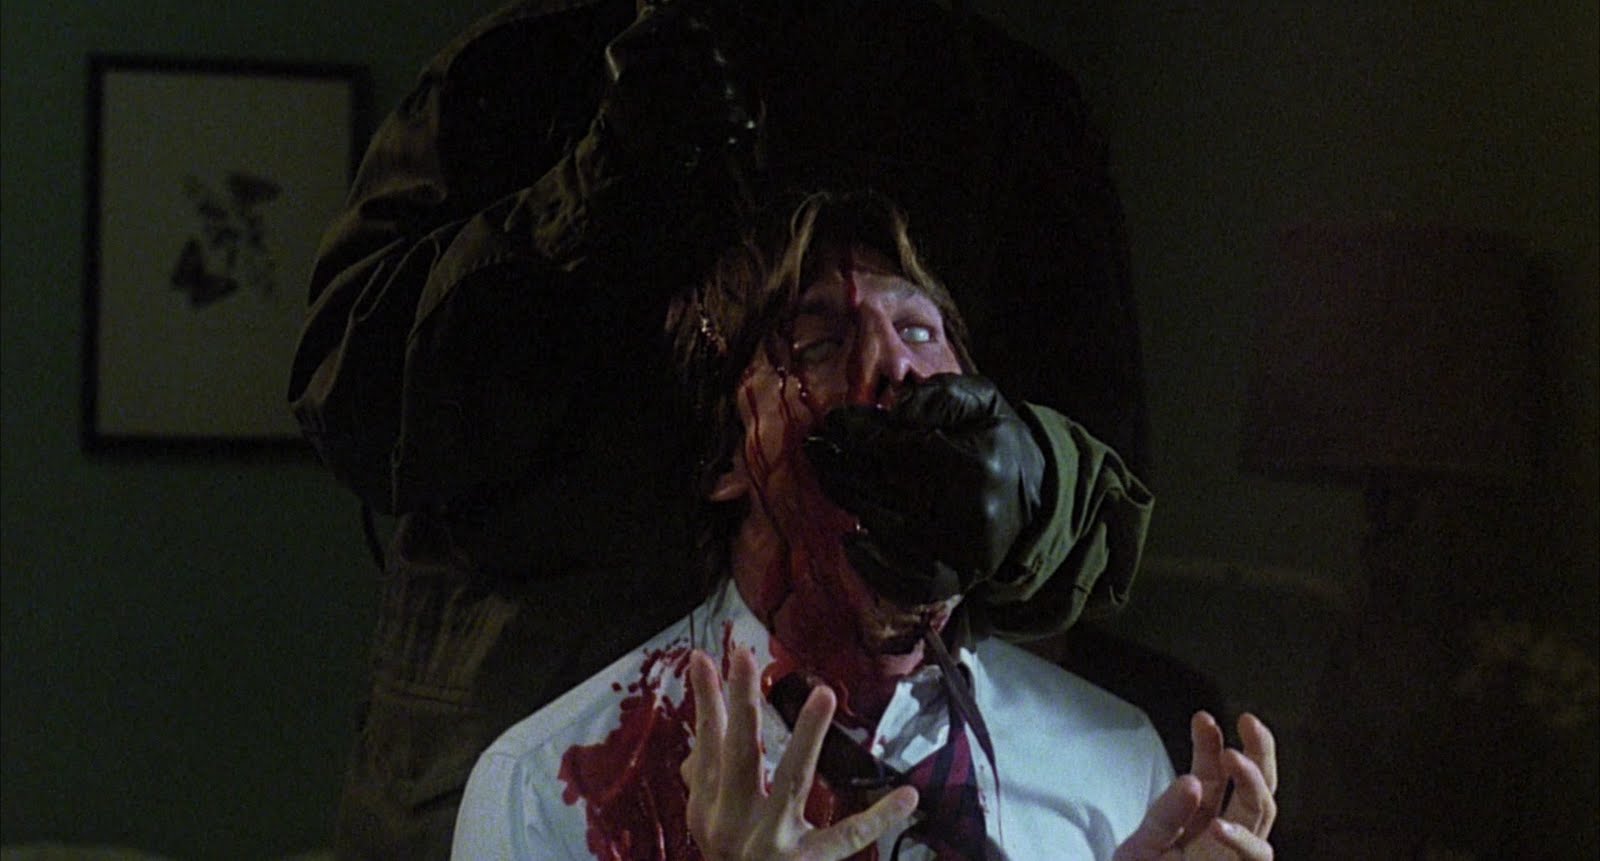 http://sinsofcinema.com/Images/The%20Prowler/The%20Prowler%20Blu-Ray%20Blue%20Underground.jpg